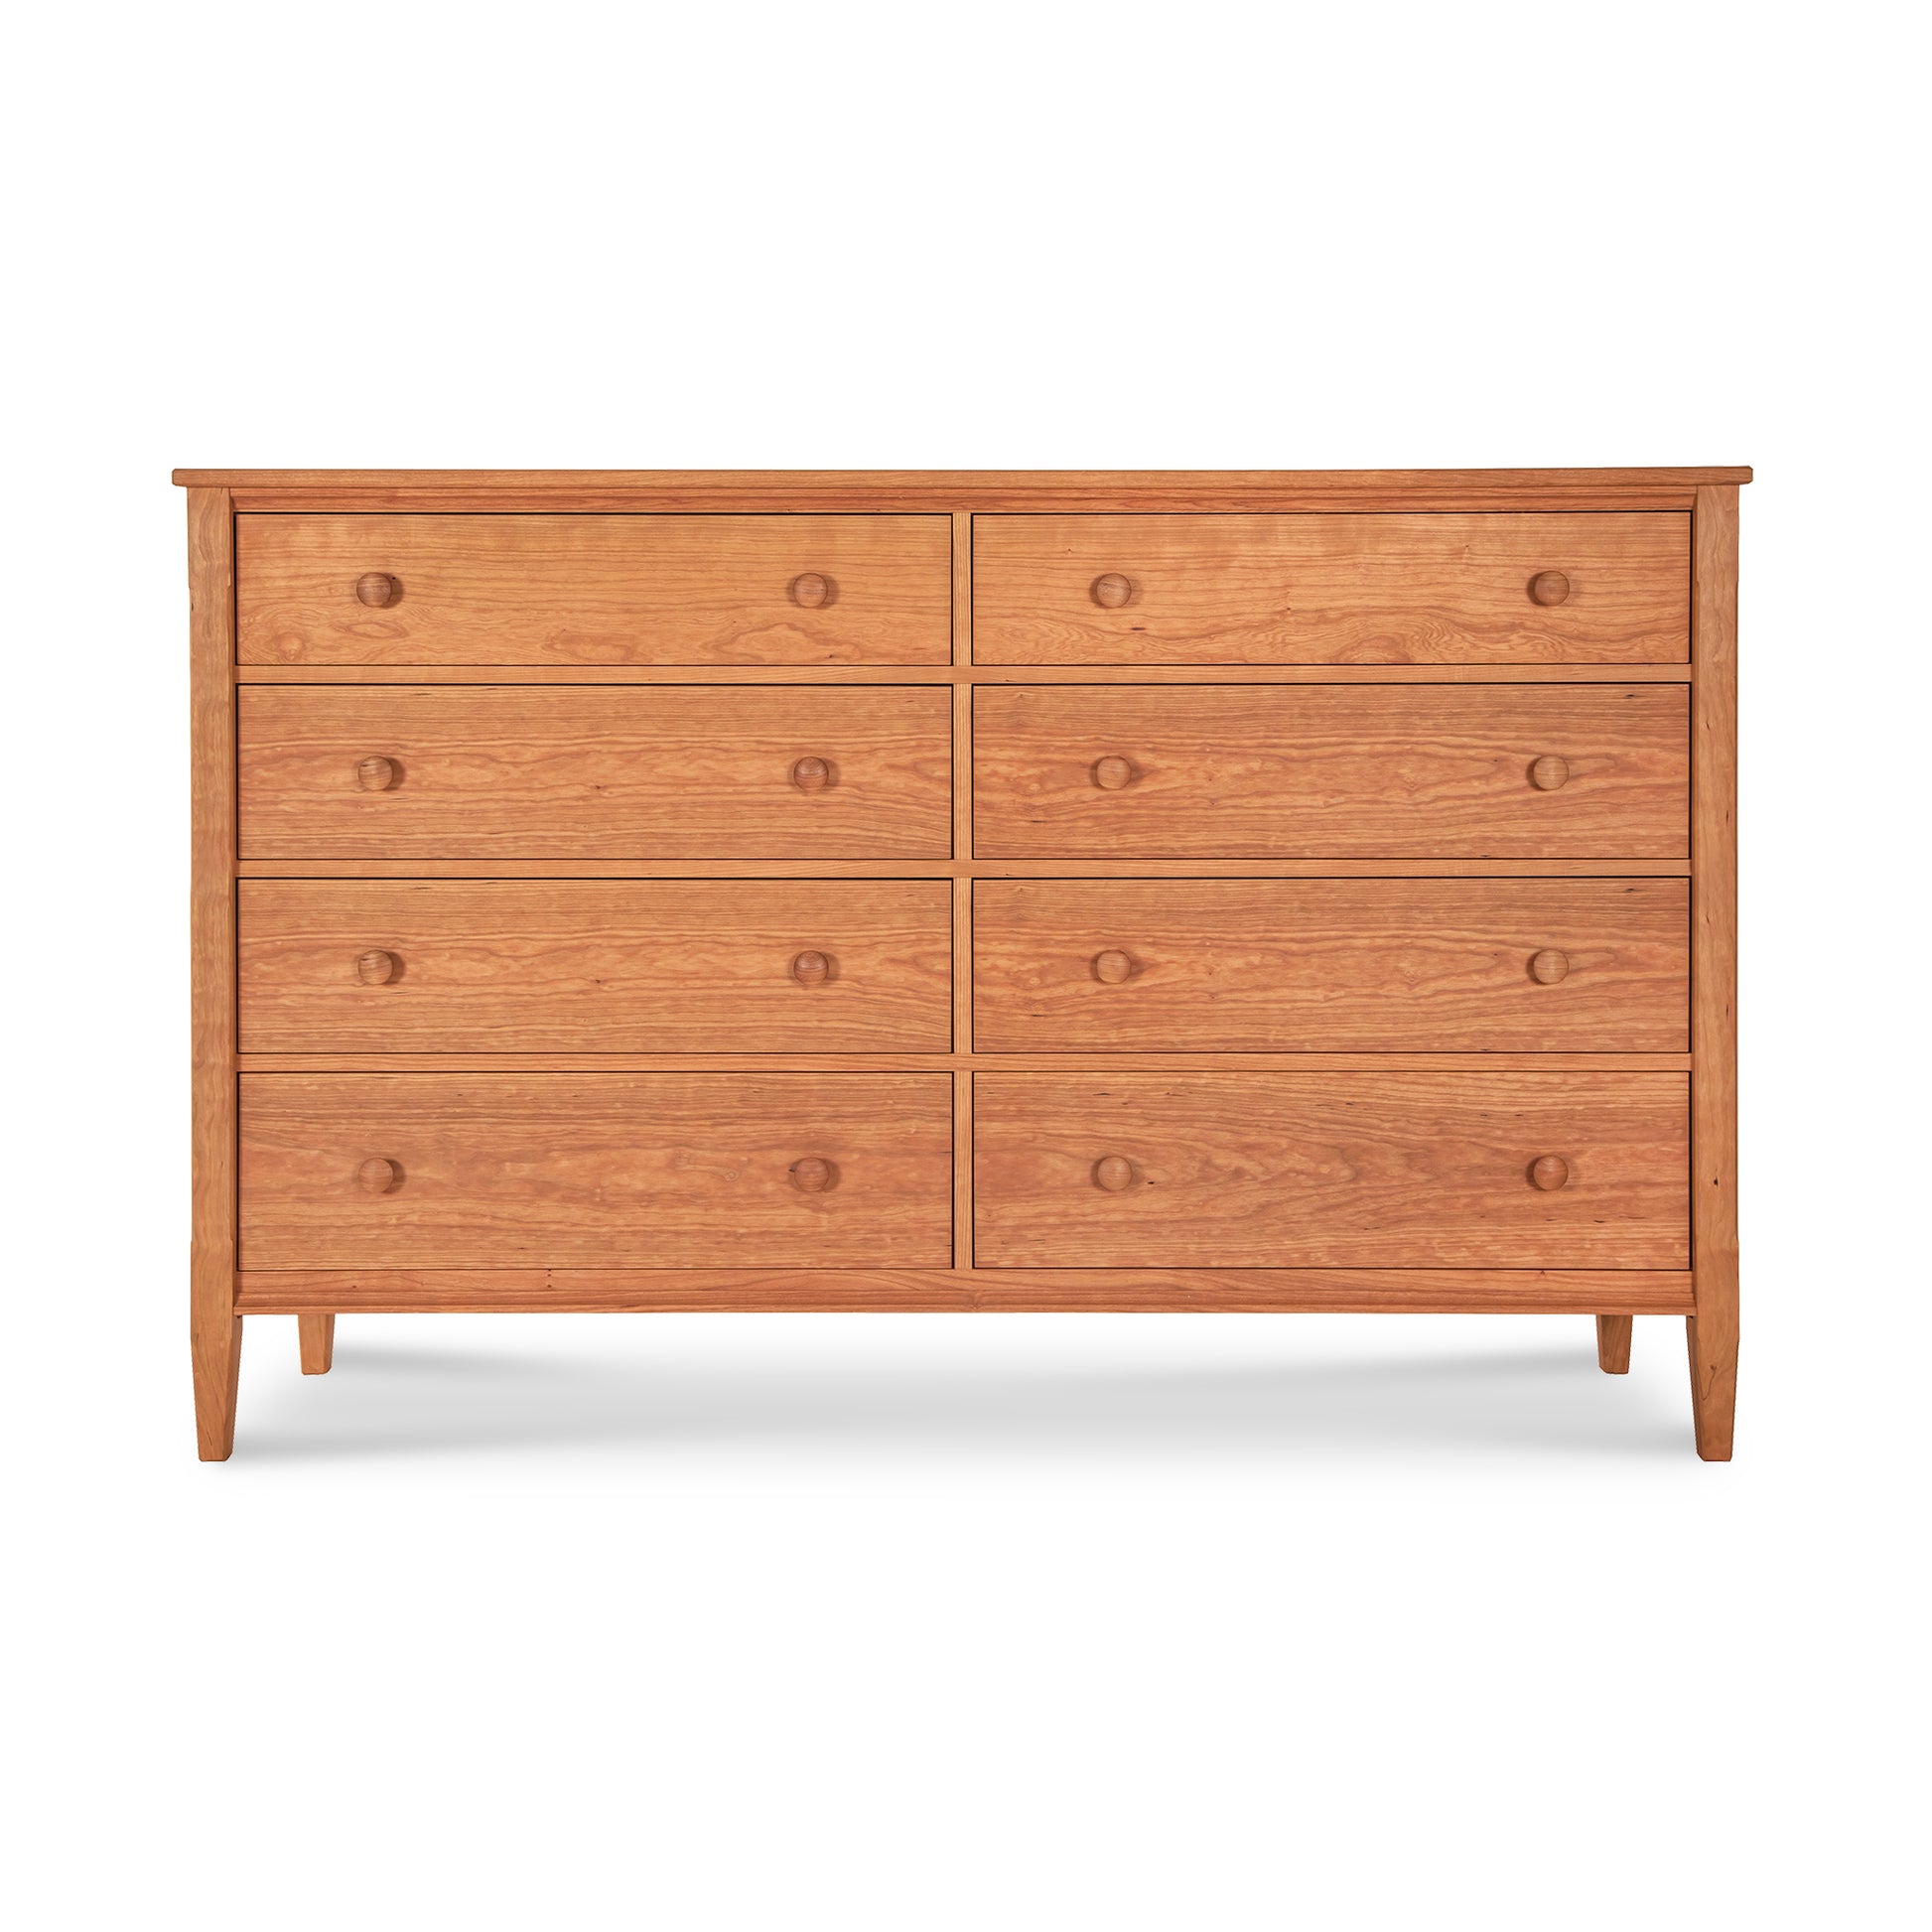 A Maple Corner Woodworks Vermont Shaker 8-Drawer Dresser, crafted from sustainably harvested solid hardwoods, isolated on a white background.